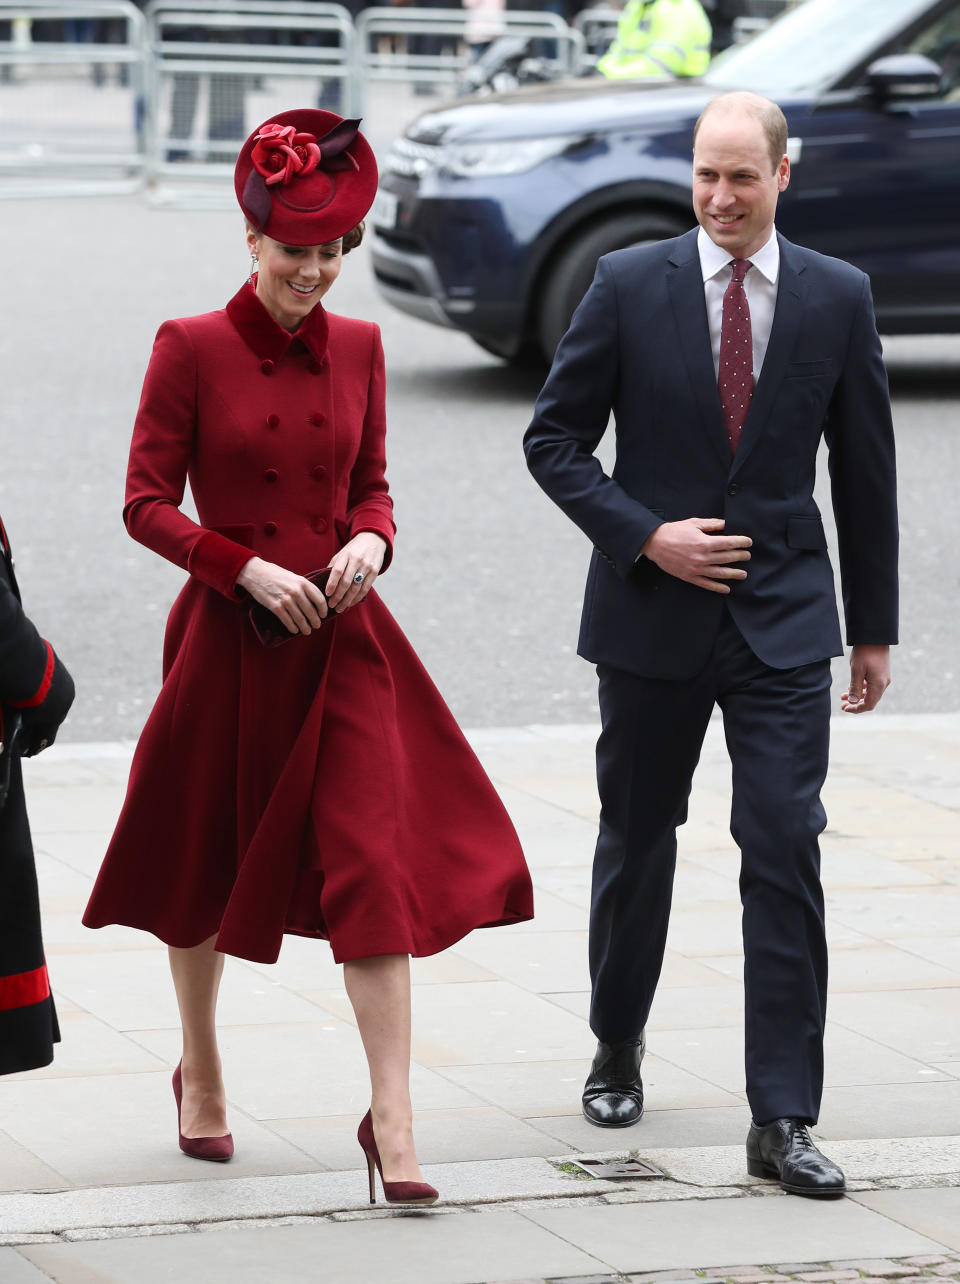 The Duke and Duchess of Cambridge arrive at the Commonwealth Service at Westminster Abbey, London on Commonwealth Day. The service is the Duke and Duchess of Sussex's final official engagement before they quit royal life.